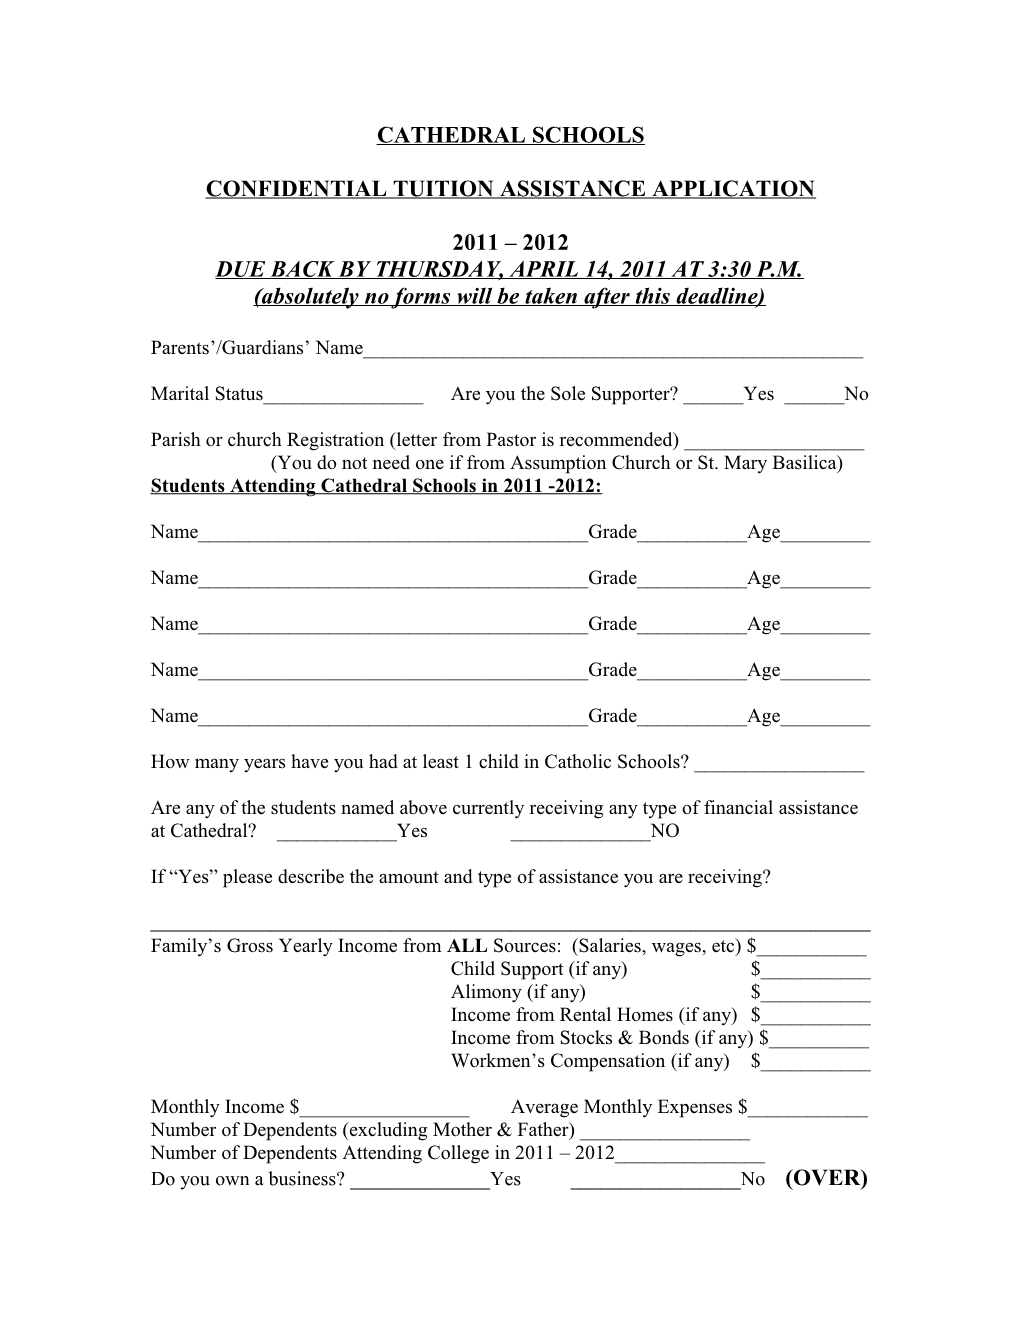 Confidential Tuition Assistance Application